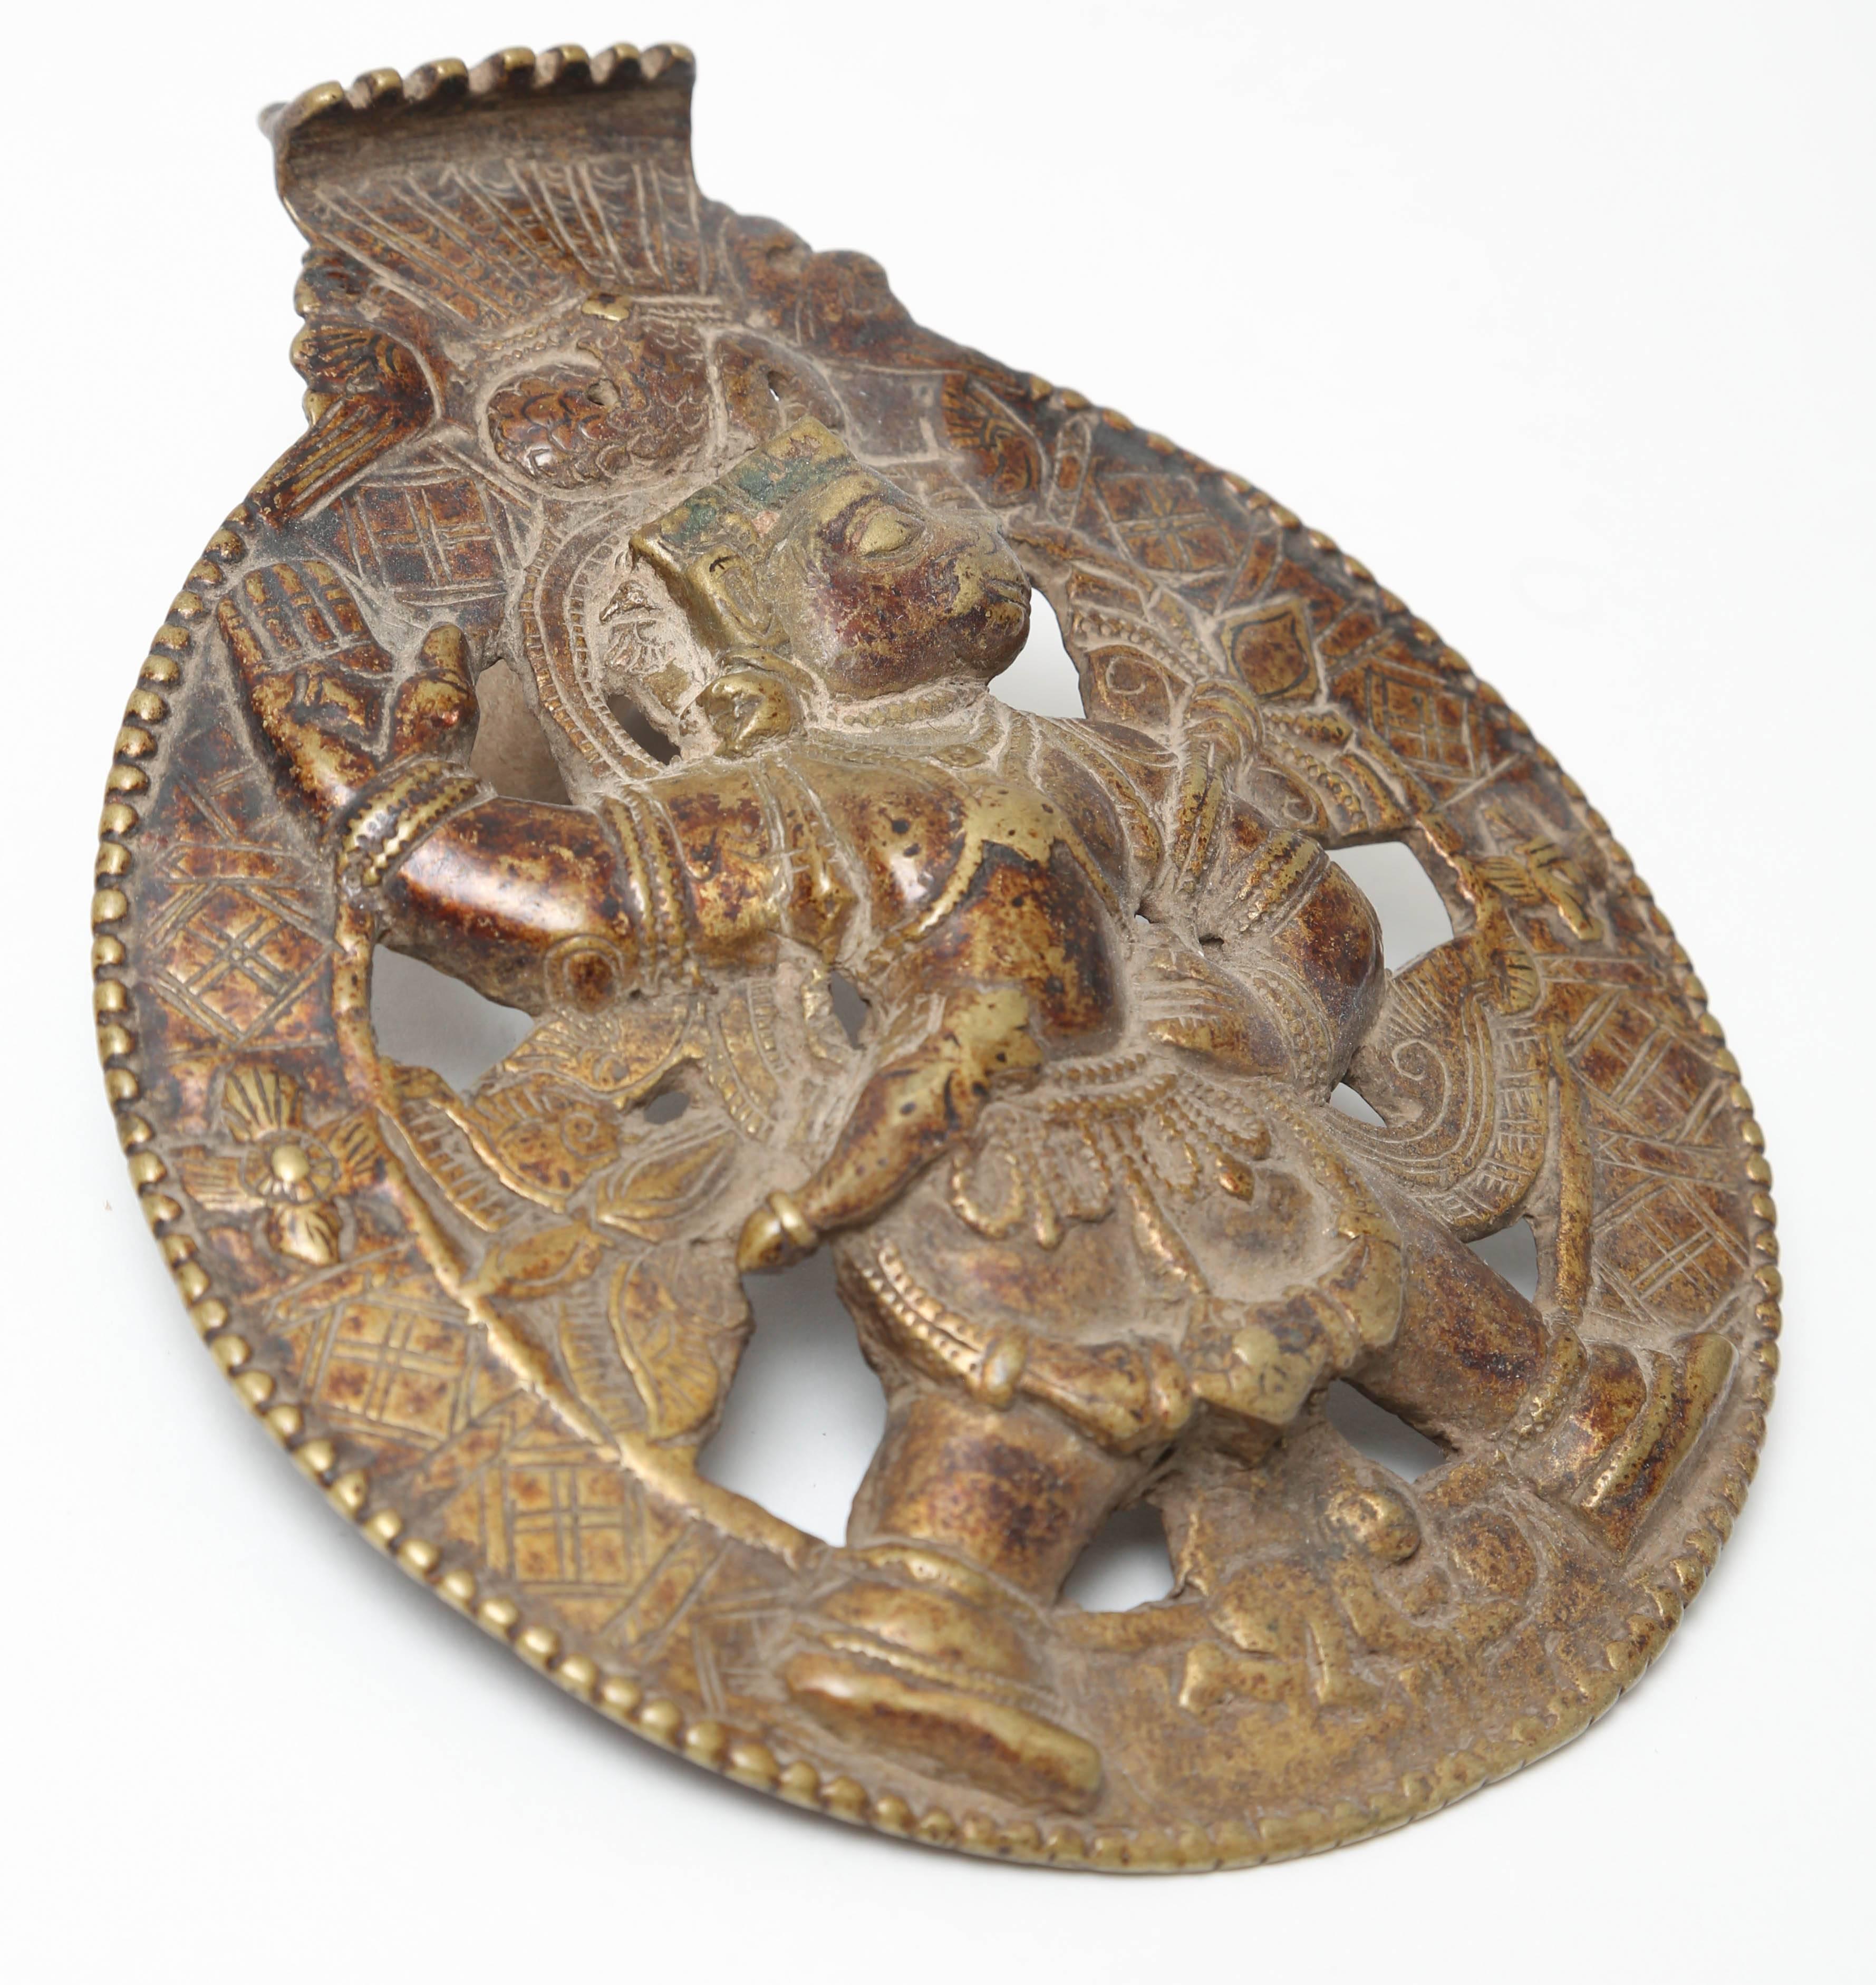 Roundel bronze relief of the god Hanuman shown in profile walking with his right hand raised, 18th-19th century.